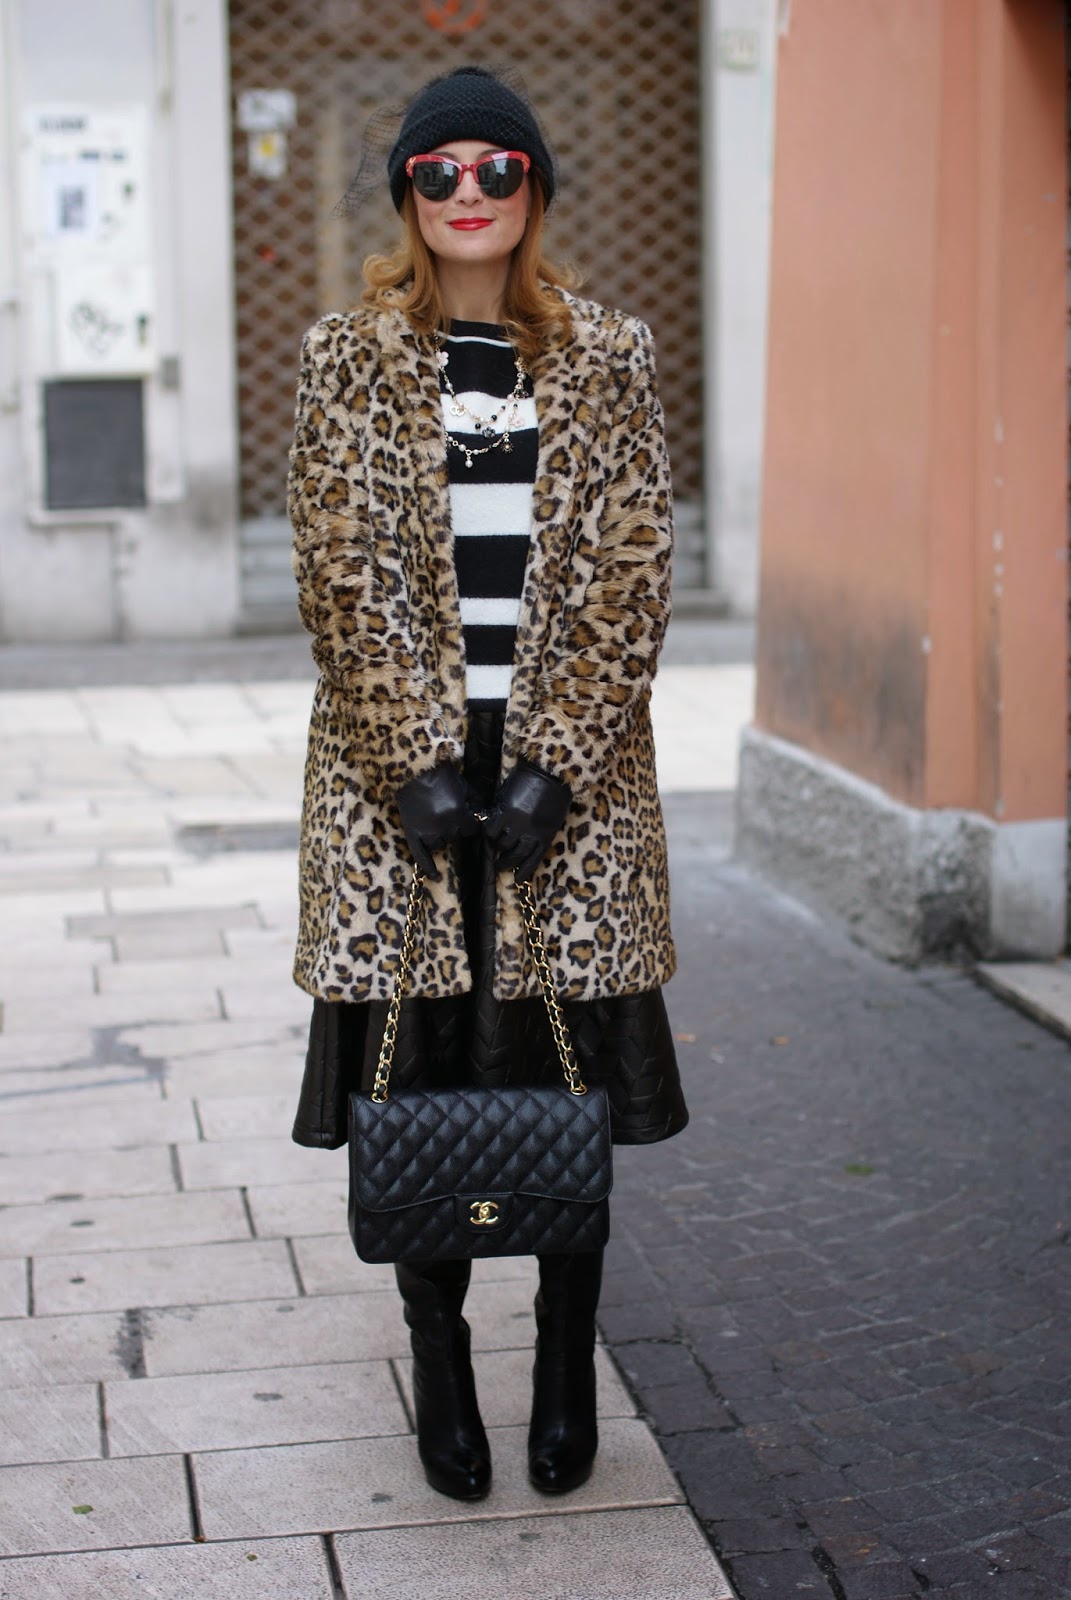 Zara leopard print faux fur coat with veiled beanie hat and Chanel 2.55 classic flap bag on Fashion and Cookies fashion blogger